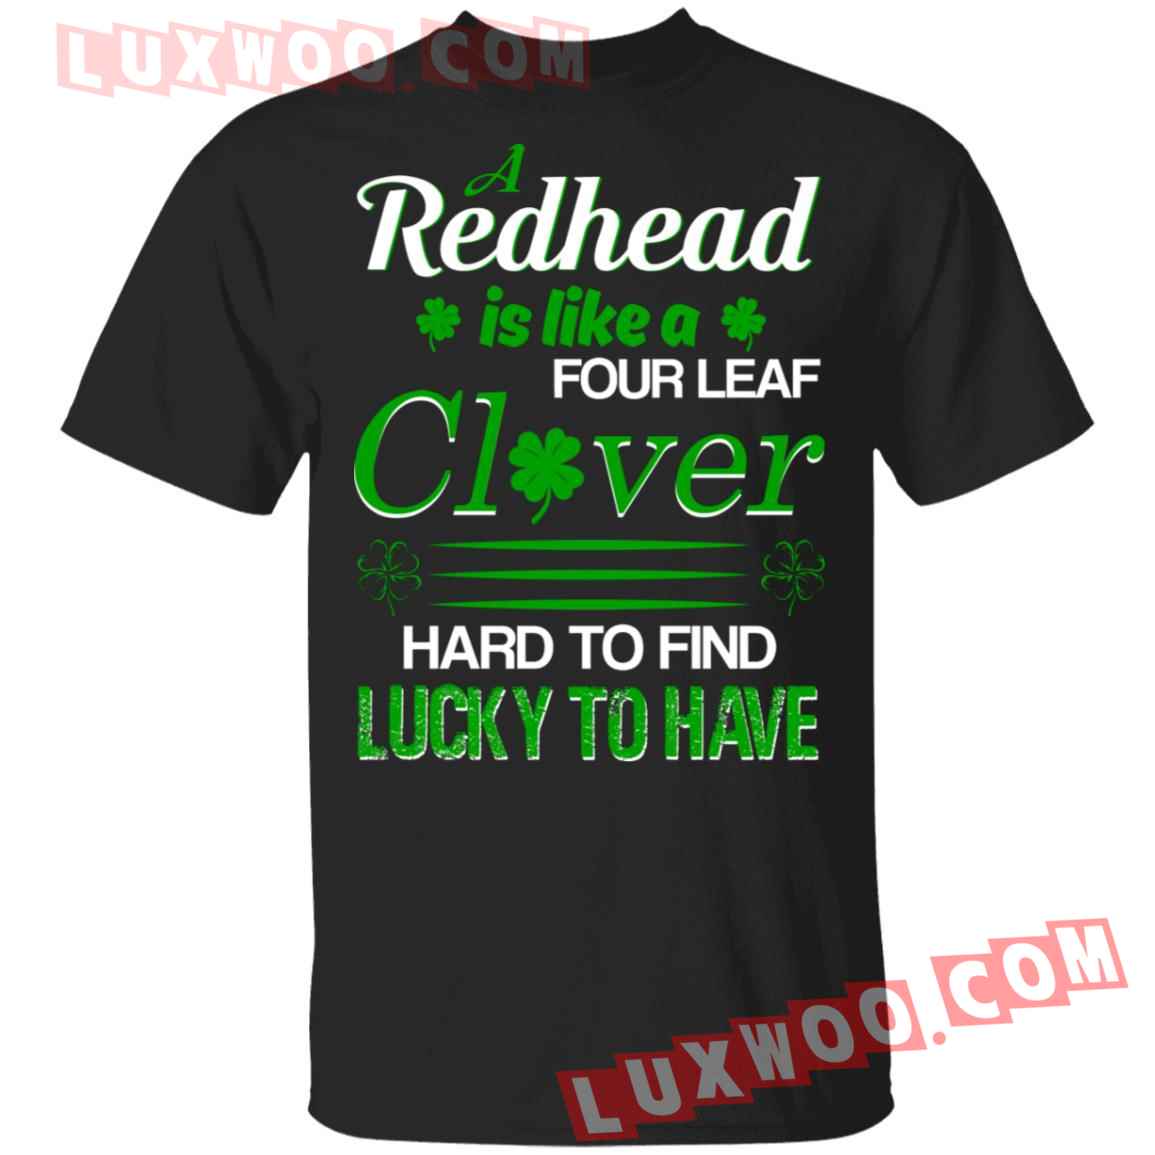 A Redhead Four Leaf Clover Hard To Find Lucky To Have Shirt